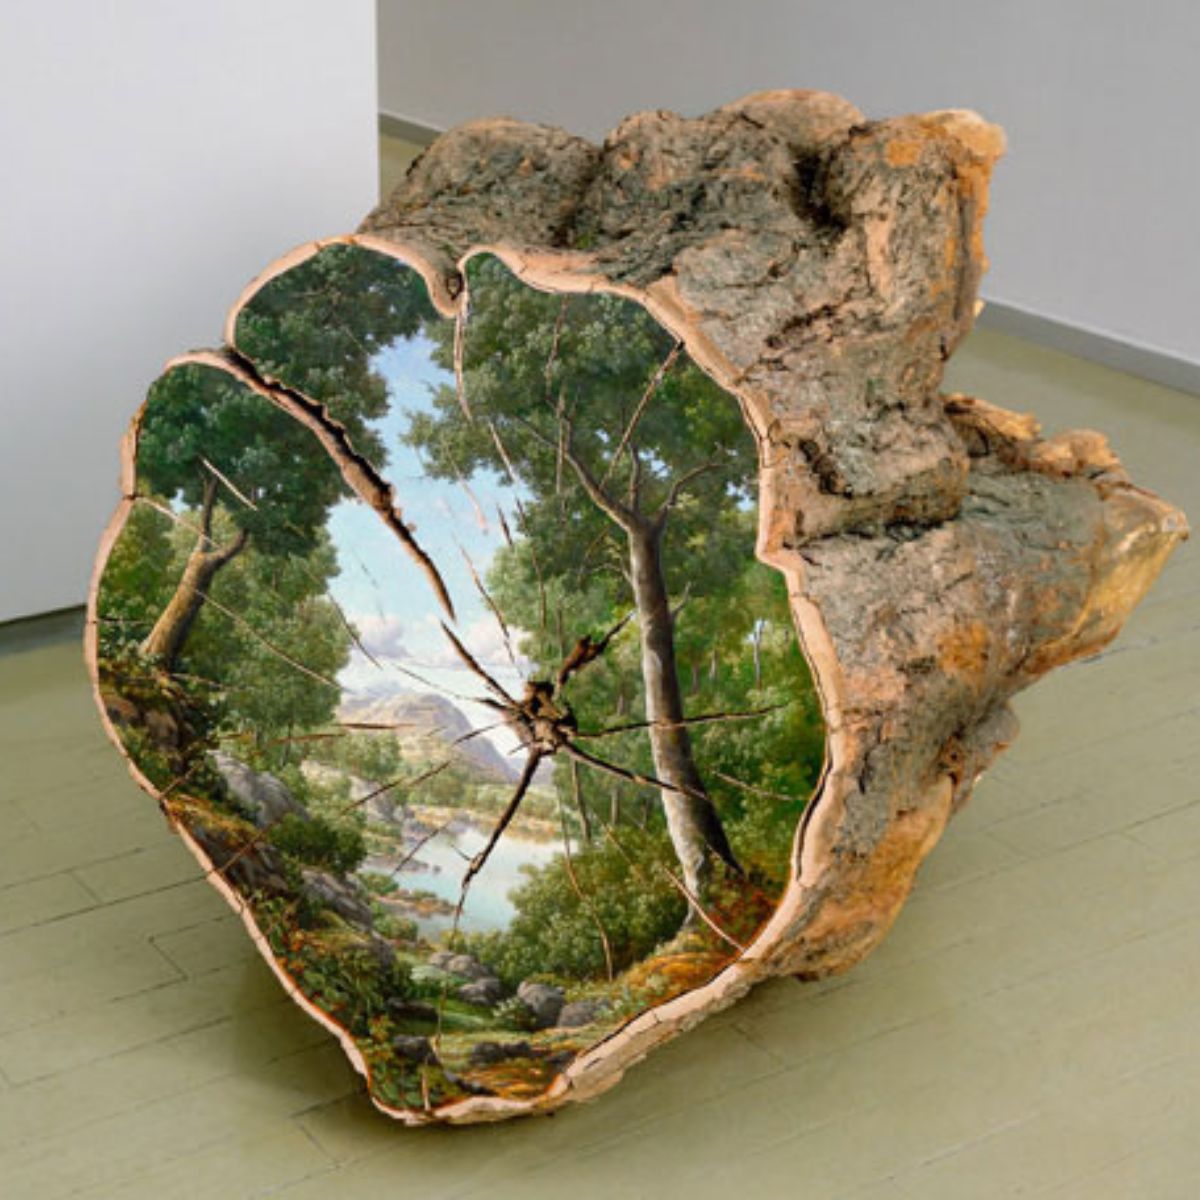 Hand painted landscapes art by Alison Moritsugu showcasing an incredible log collection 